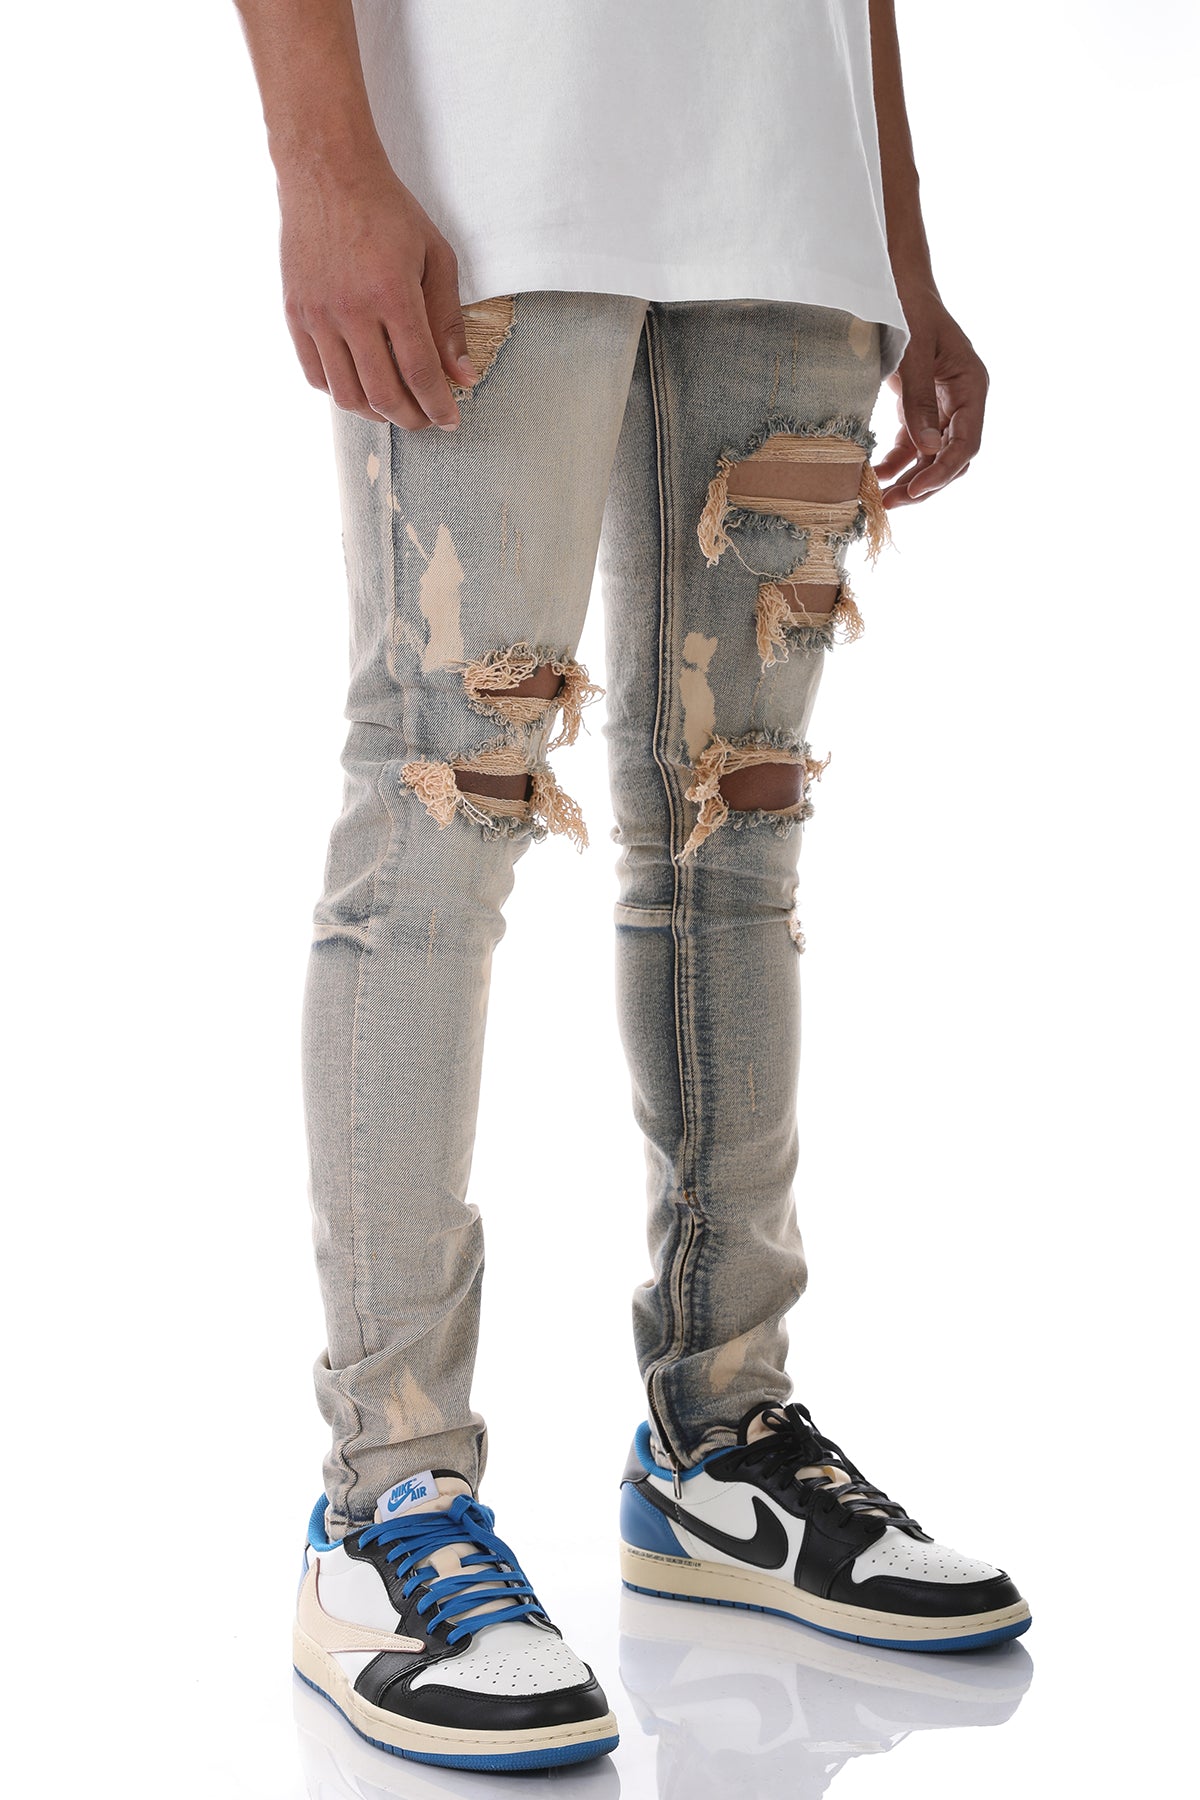 The Native Men's Distressed Denim Jeans Blue Pants Destroyed Knees Slim Fit Ankle  Zippers | Distressed denim, Distressed denim jeans, Blue pants